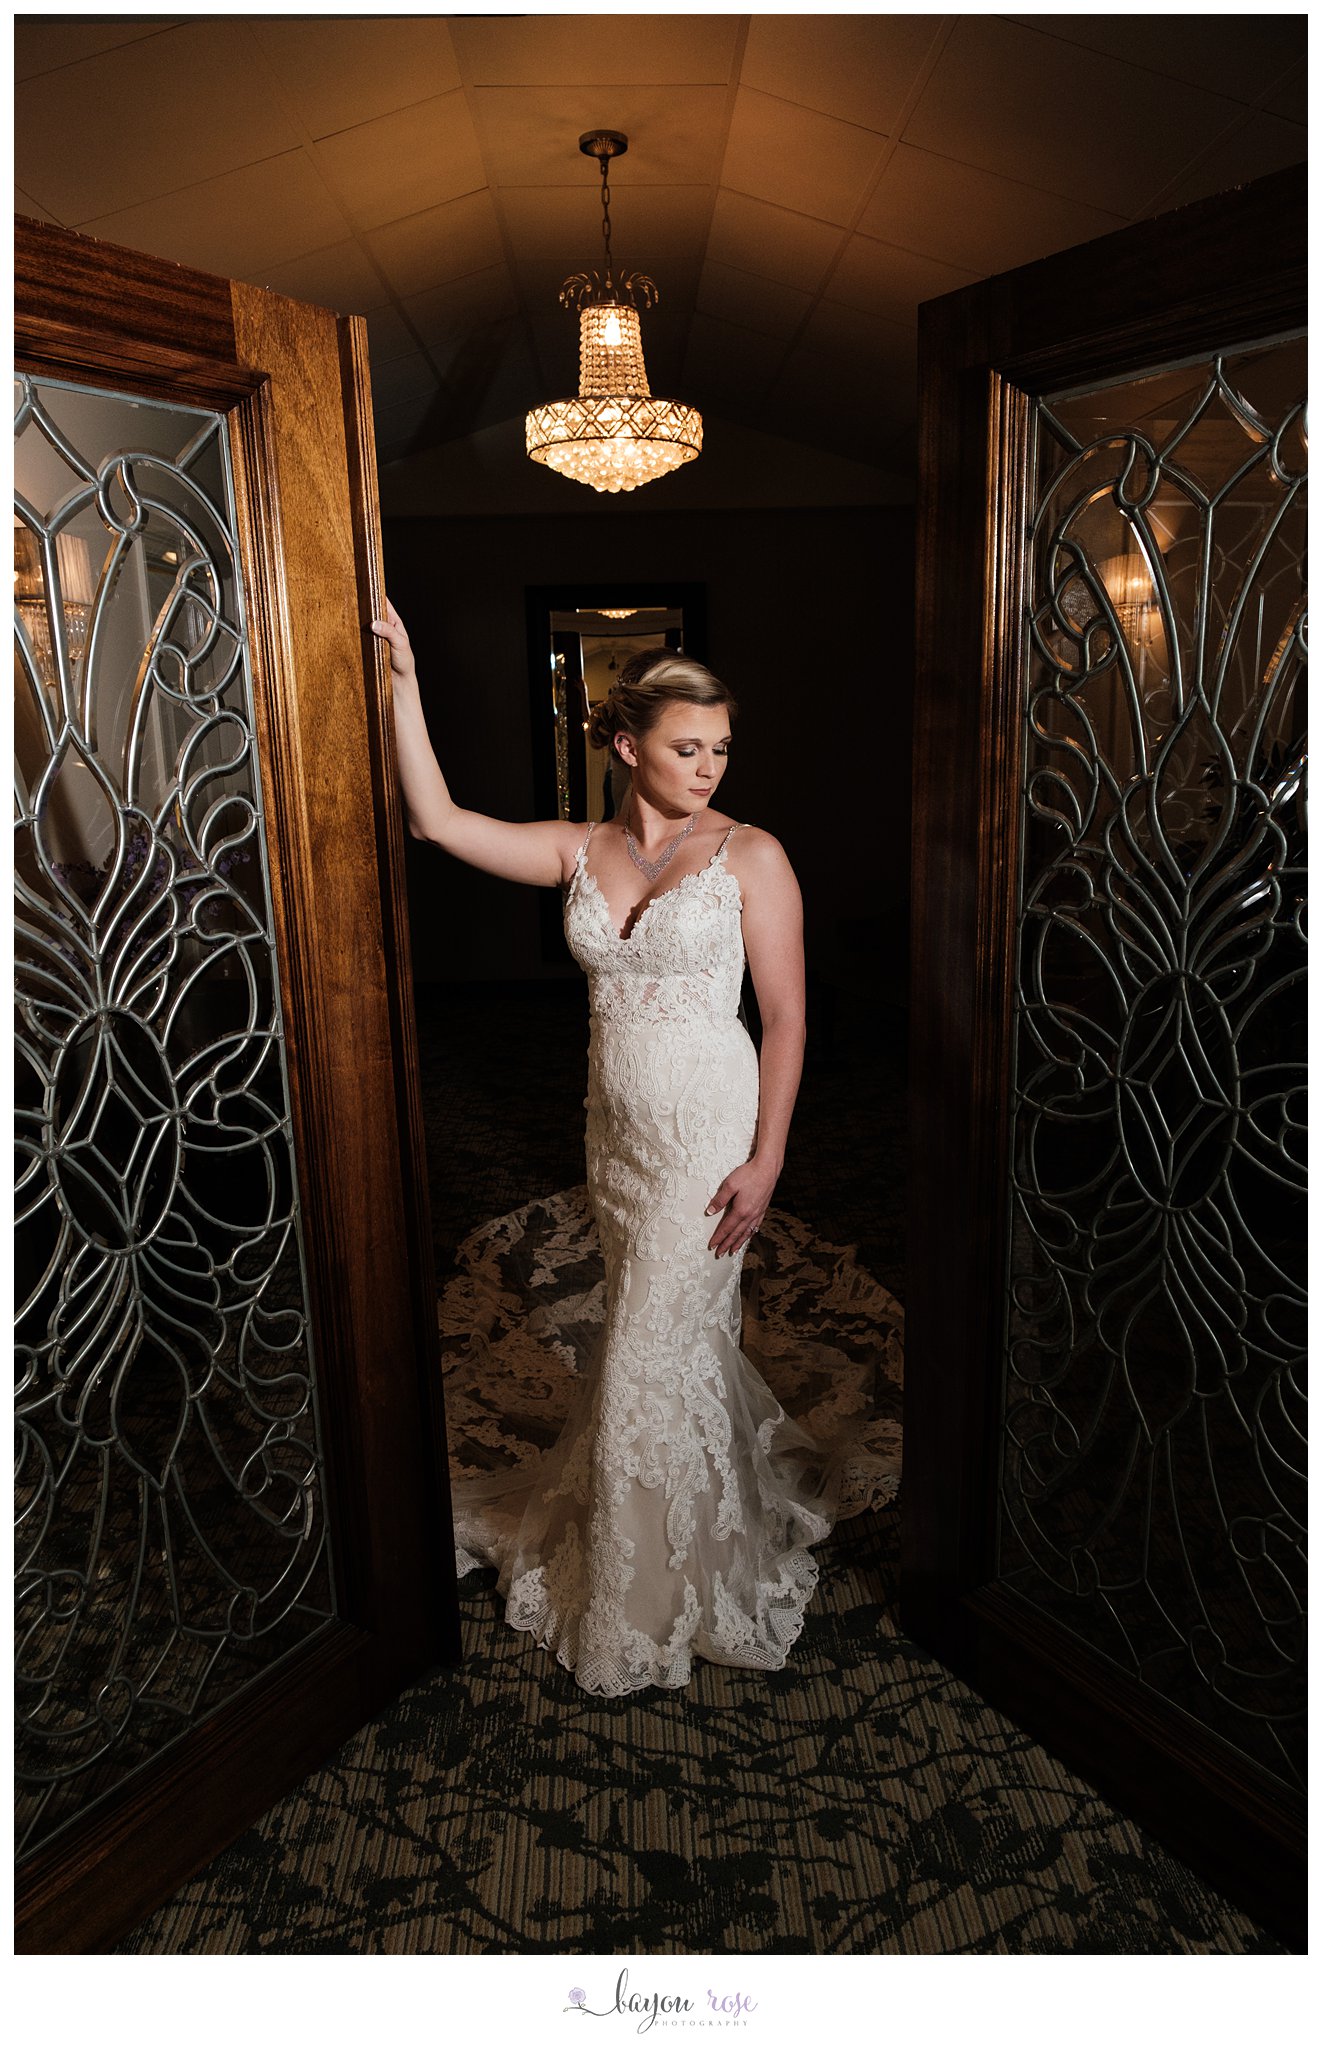 Bride posing in doorway of The Oaks for bridal photo session